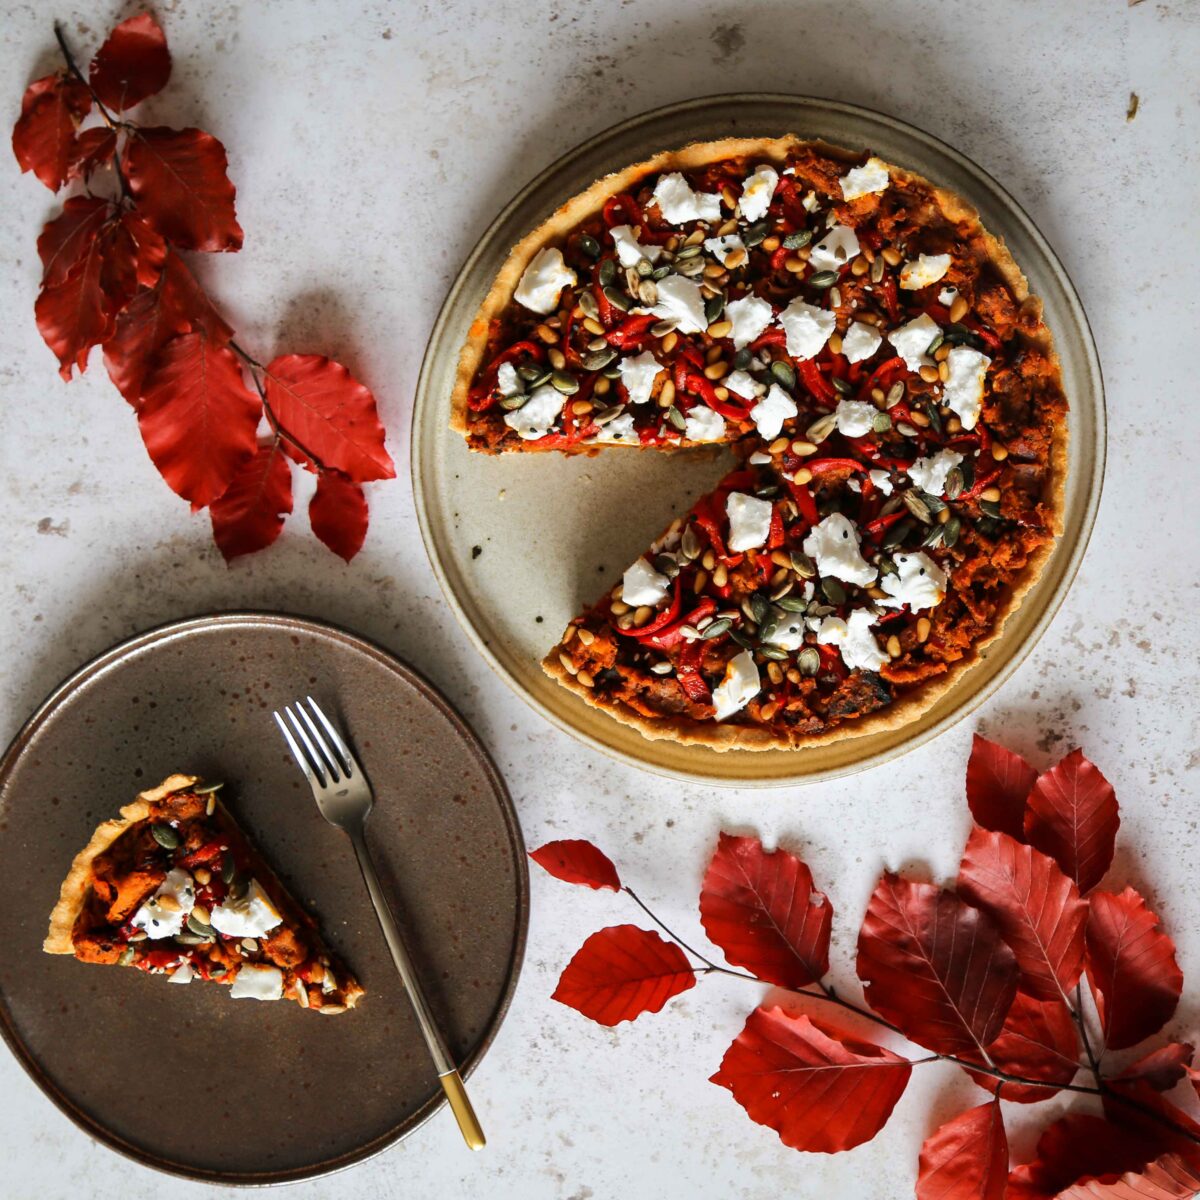 Overhead shot of an autumn tart with leaves used as props